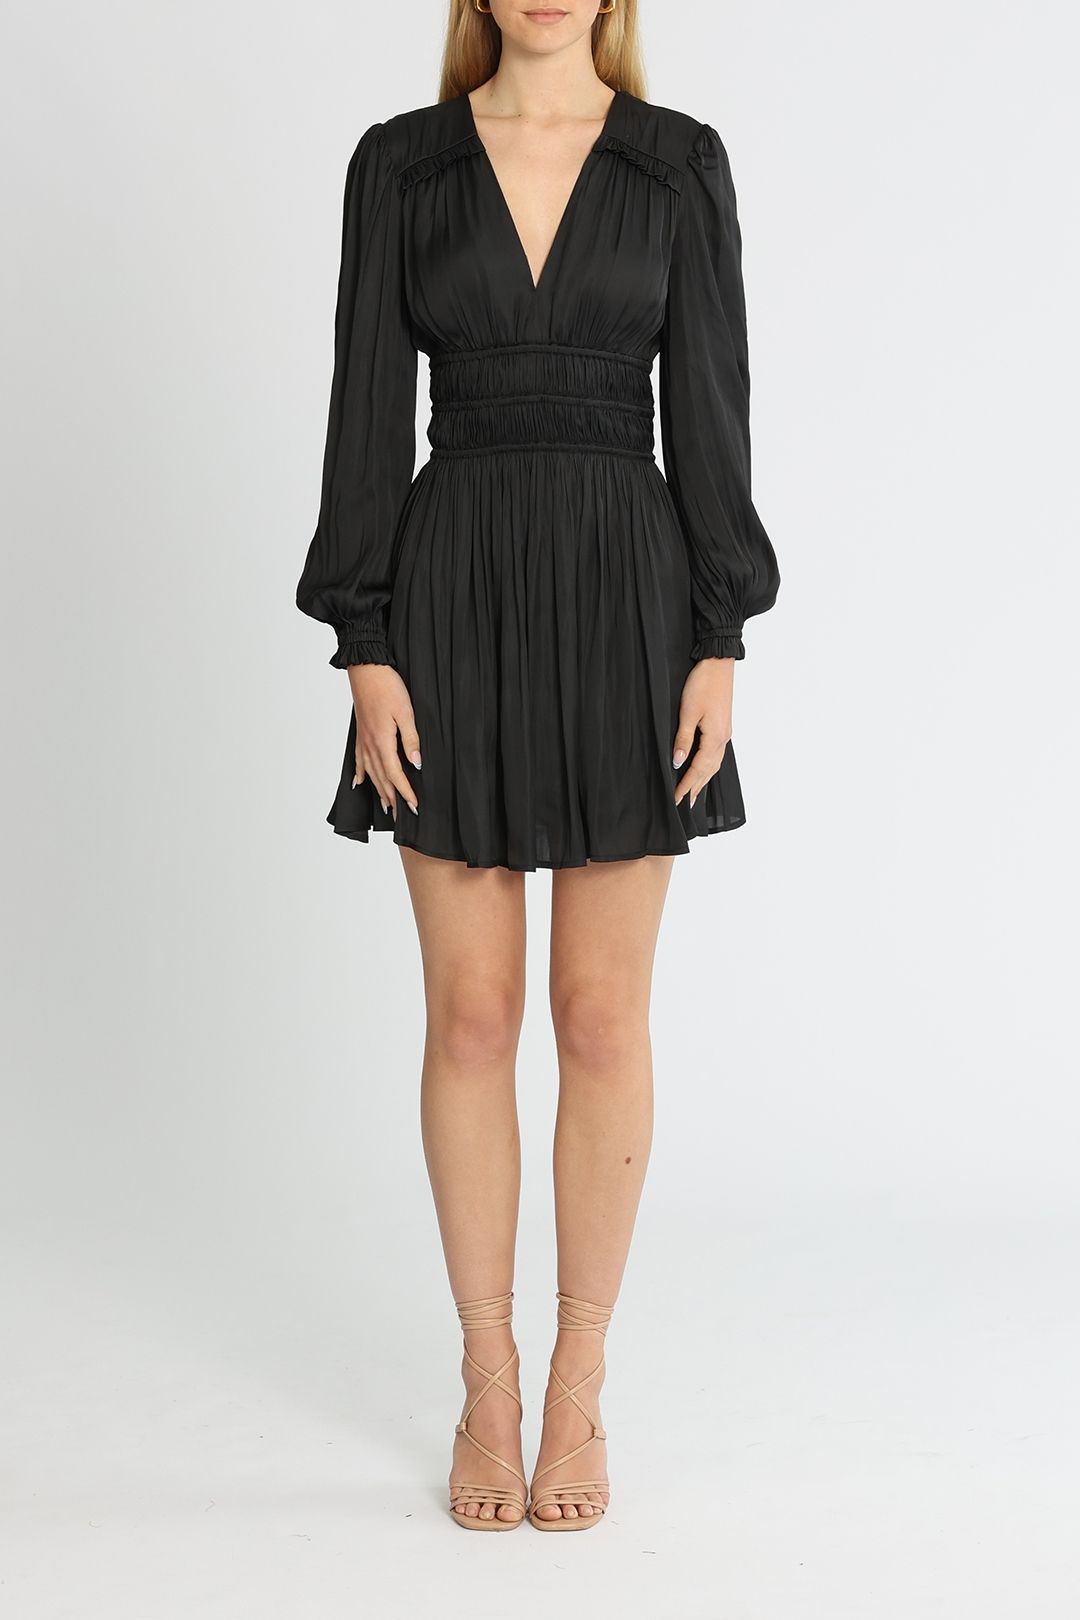 Belle and Bloom Shine Bright Ruched Mini Dress Black